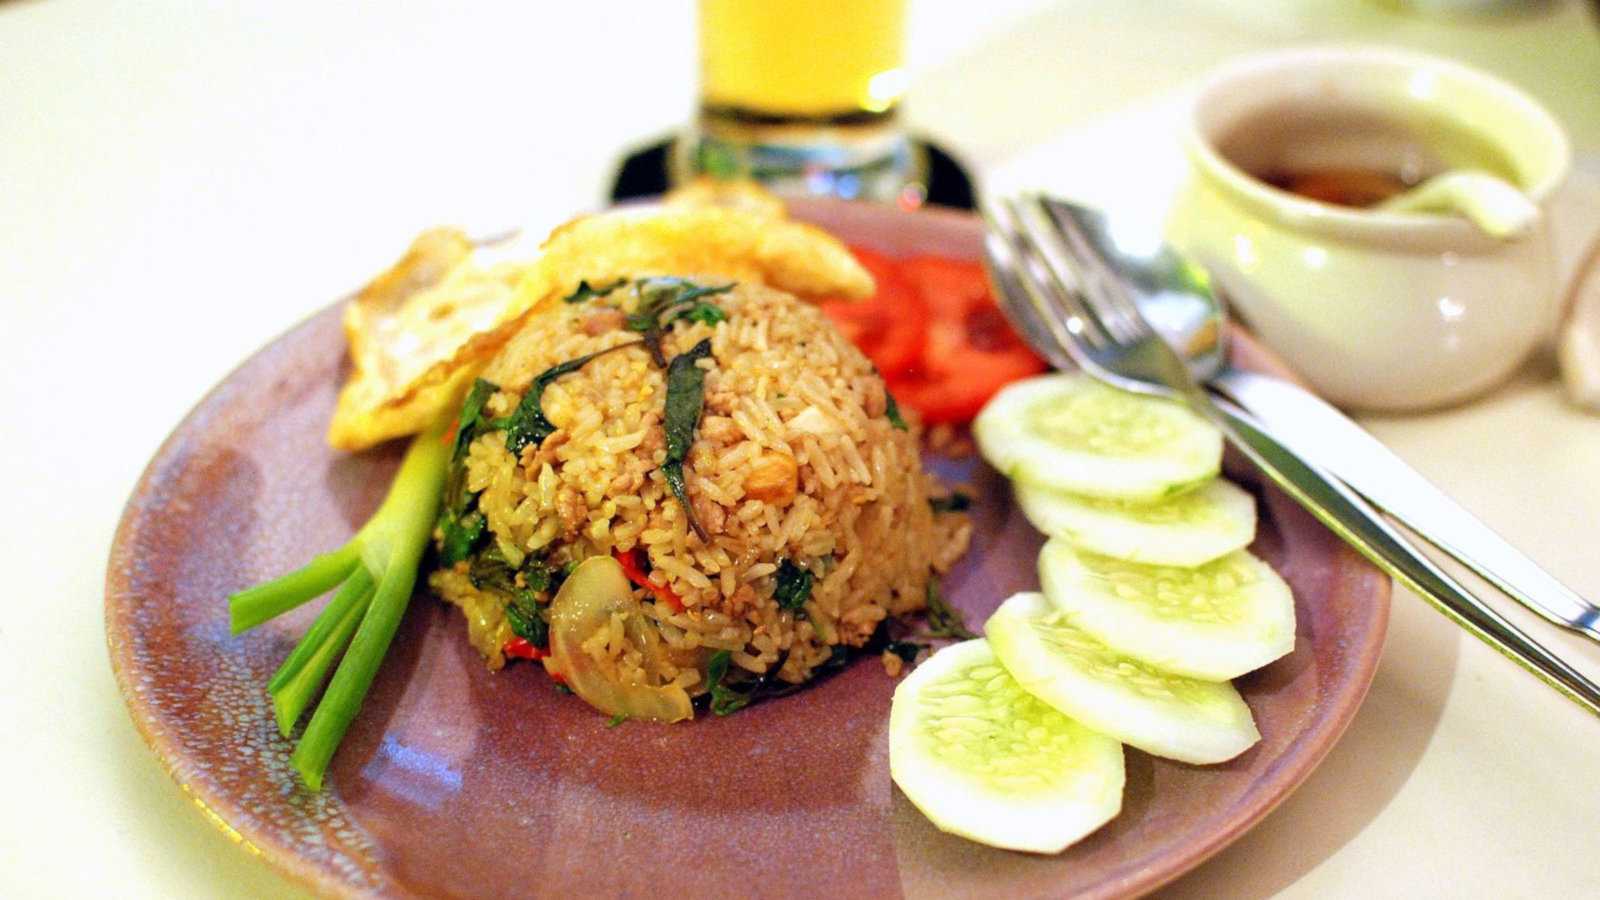 The Thai version of fried rice uses a spicy fish sauce as the base rather than soy sauce like Chinese fried rice